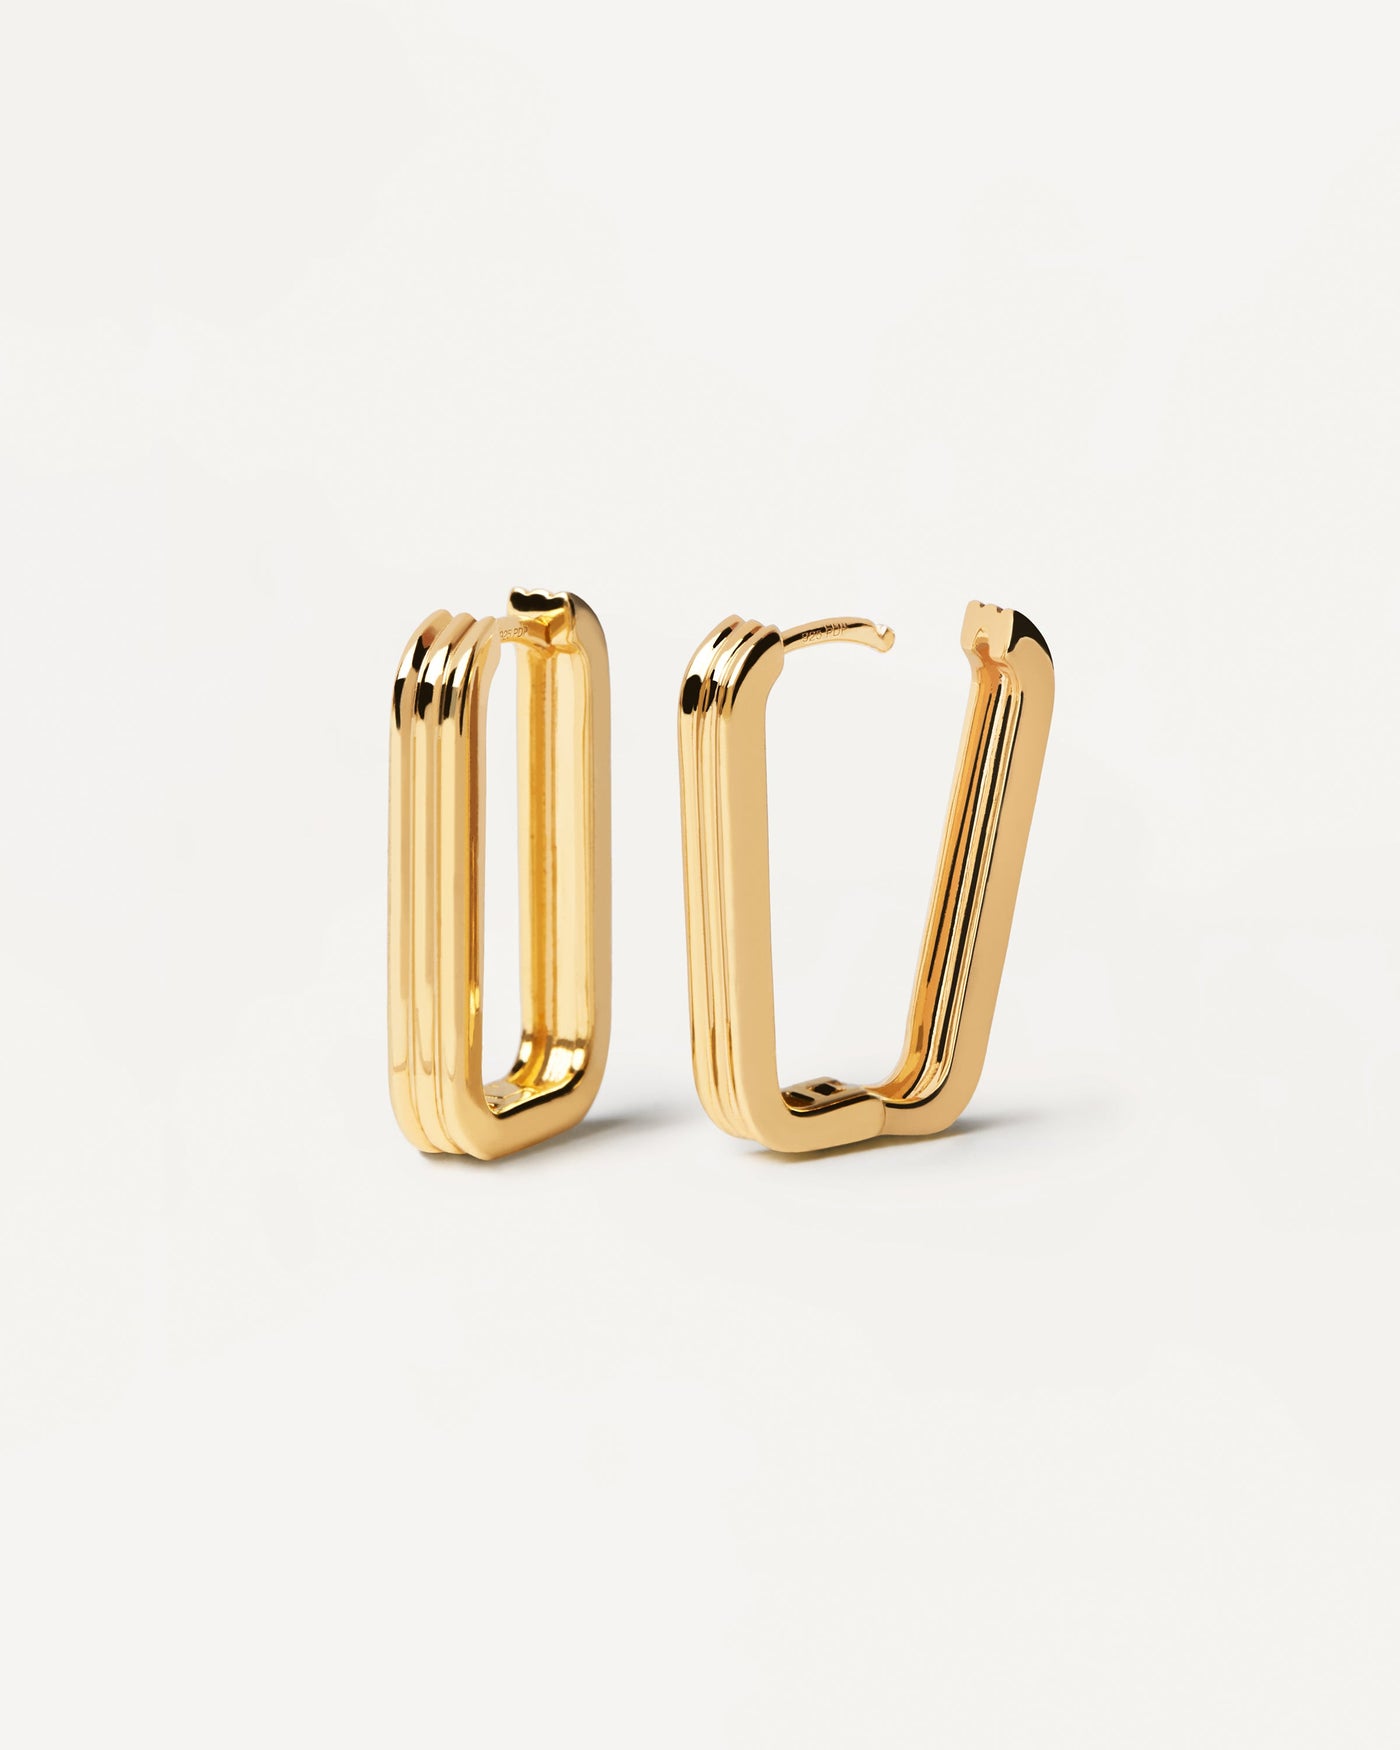 2023 Selection | Super Nova Earrings. Squarred hoops in gold-plated silver with 3 bands design. Get the latest arrival from PDPAOLA. Place your order safely and get this Best Seller. Free Shipping.